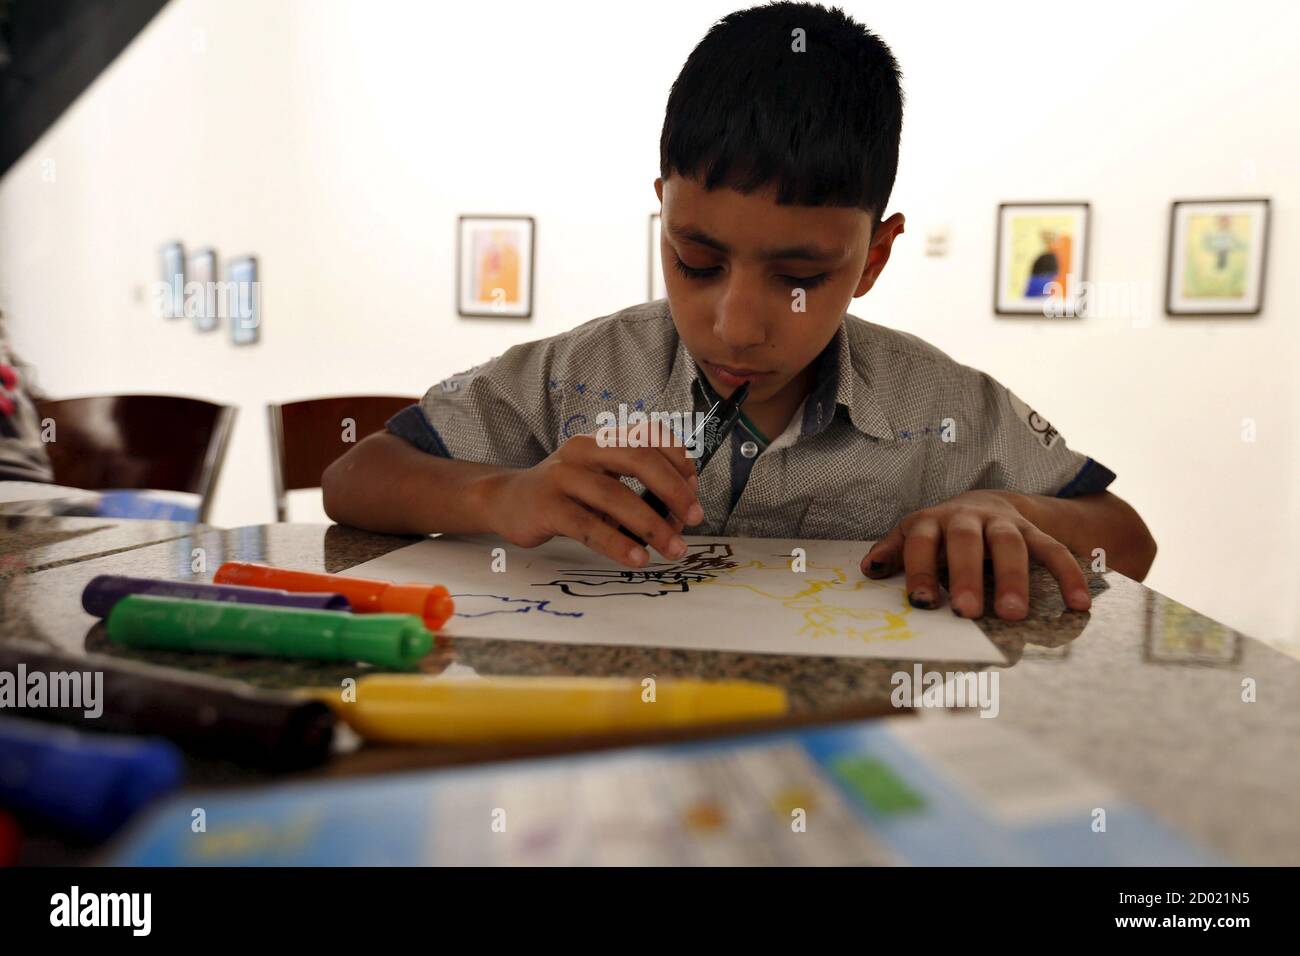 Tariq Khamees, who is blind, smells as he colors at an art exhibition in Amman, Jordan, June 17, 2015. The royal academy for blind students provides recreational and creative opportunities for a number of blind and visually impaired children, by teaching them drawing, and how to distinguish between colours through the use of smell, where each colour is characterized in a distinctive odour. The academy is holding its first student art exhibition and proceeds go back to the children to encourage them to continue drawing, according to their artist teacher. Picture taken June 17, 2015. REUTERS/Muh Stock Photo